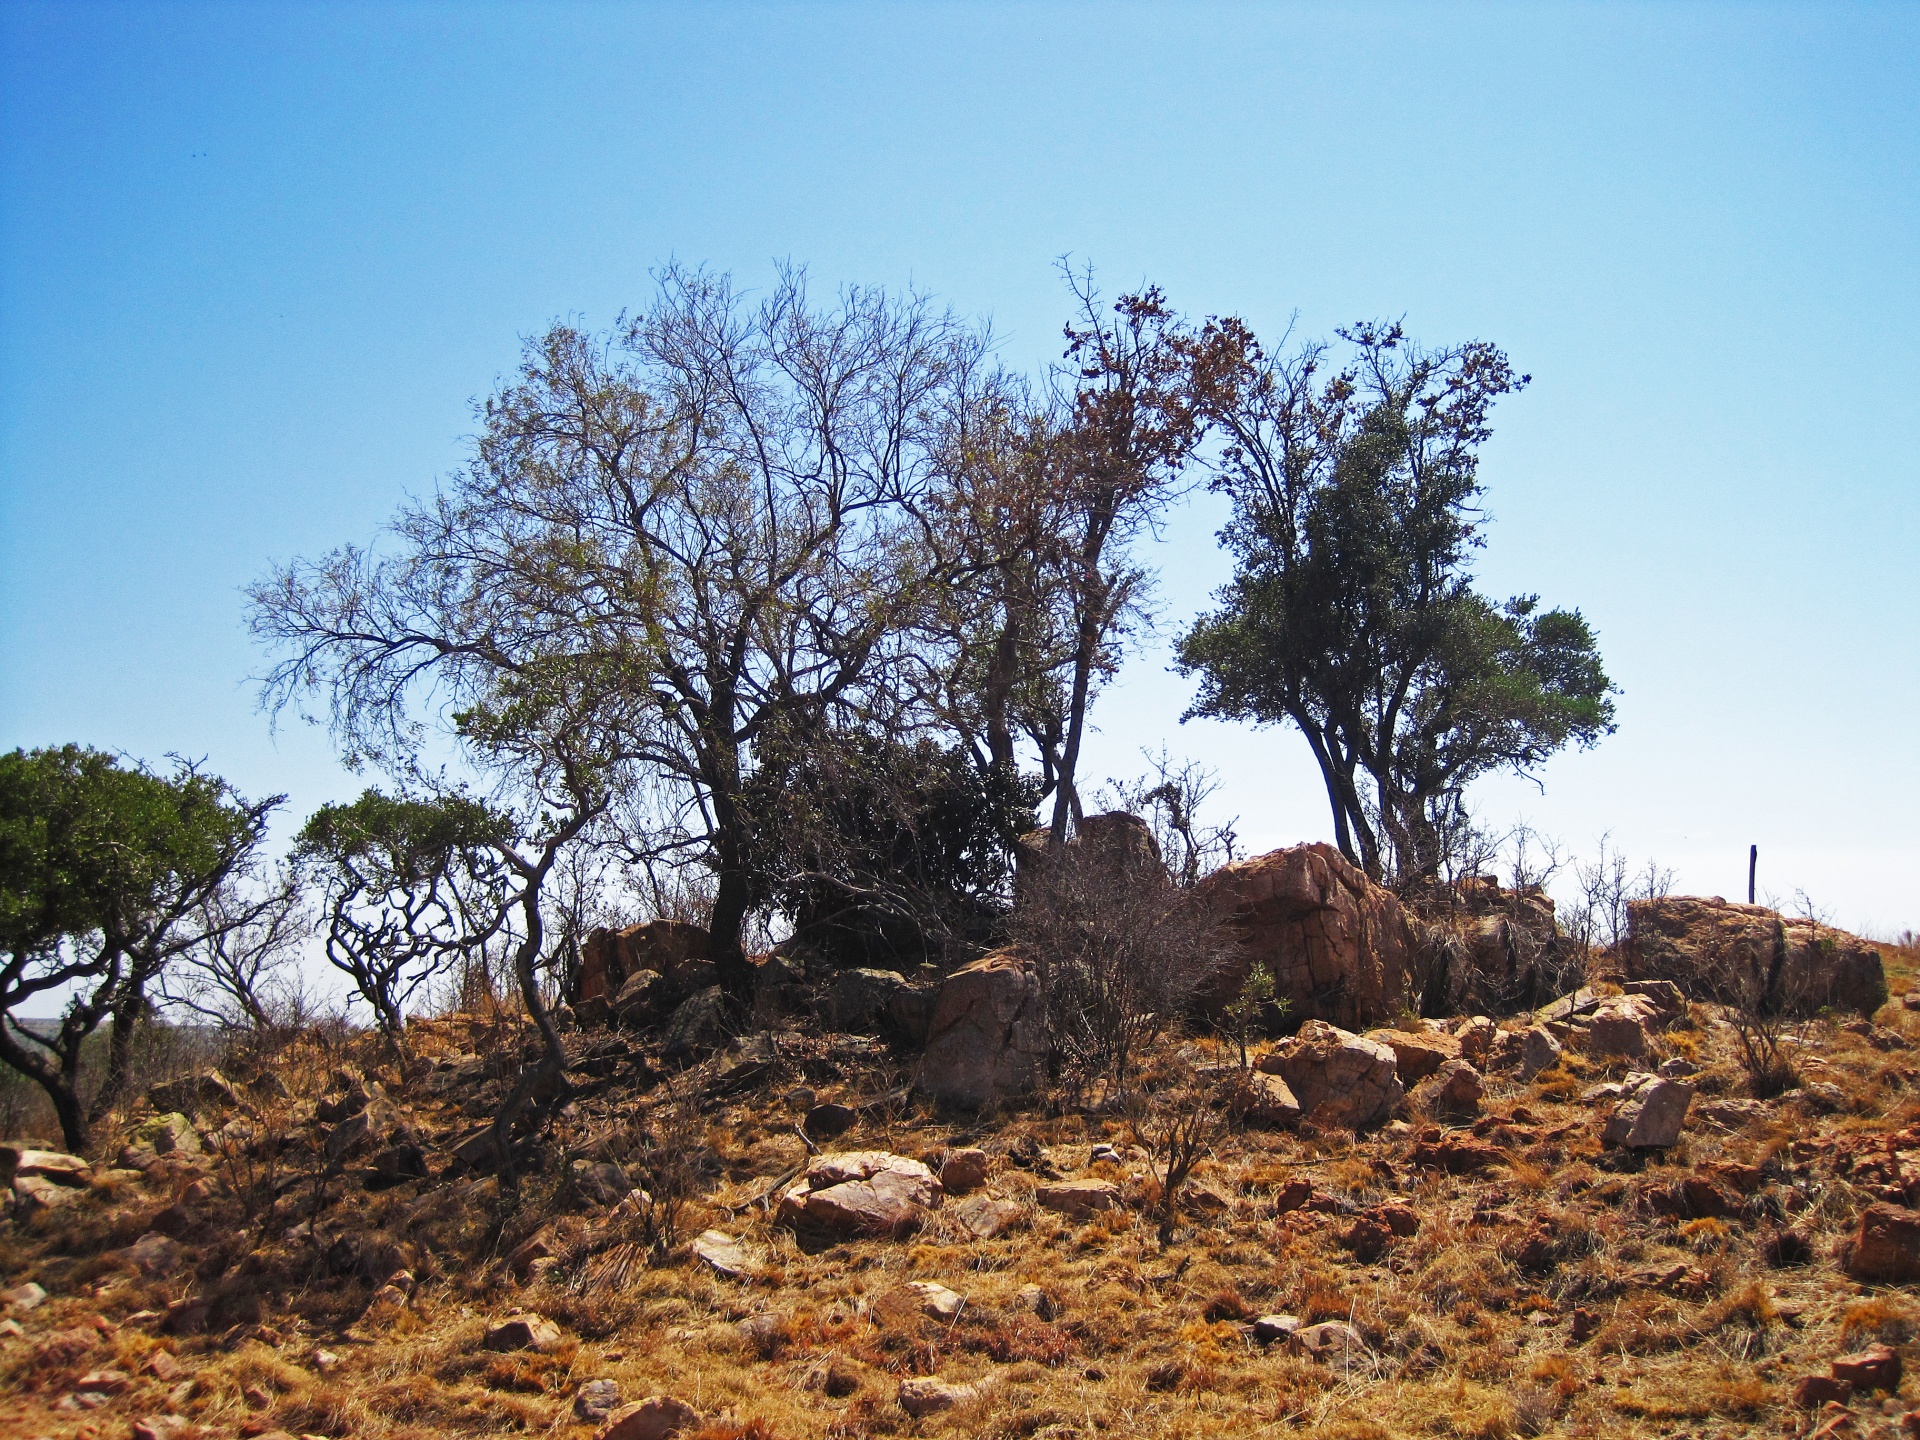 Raised Rocky Area With Trees